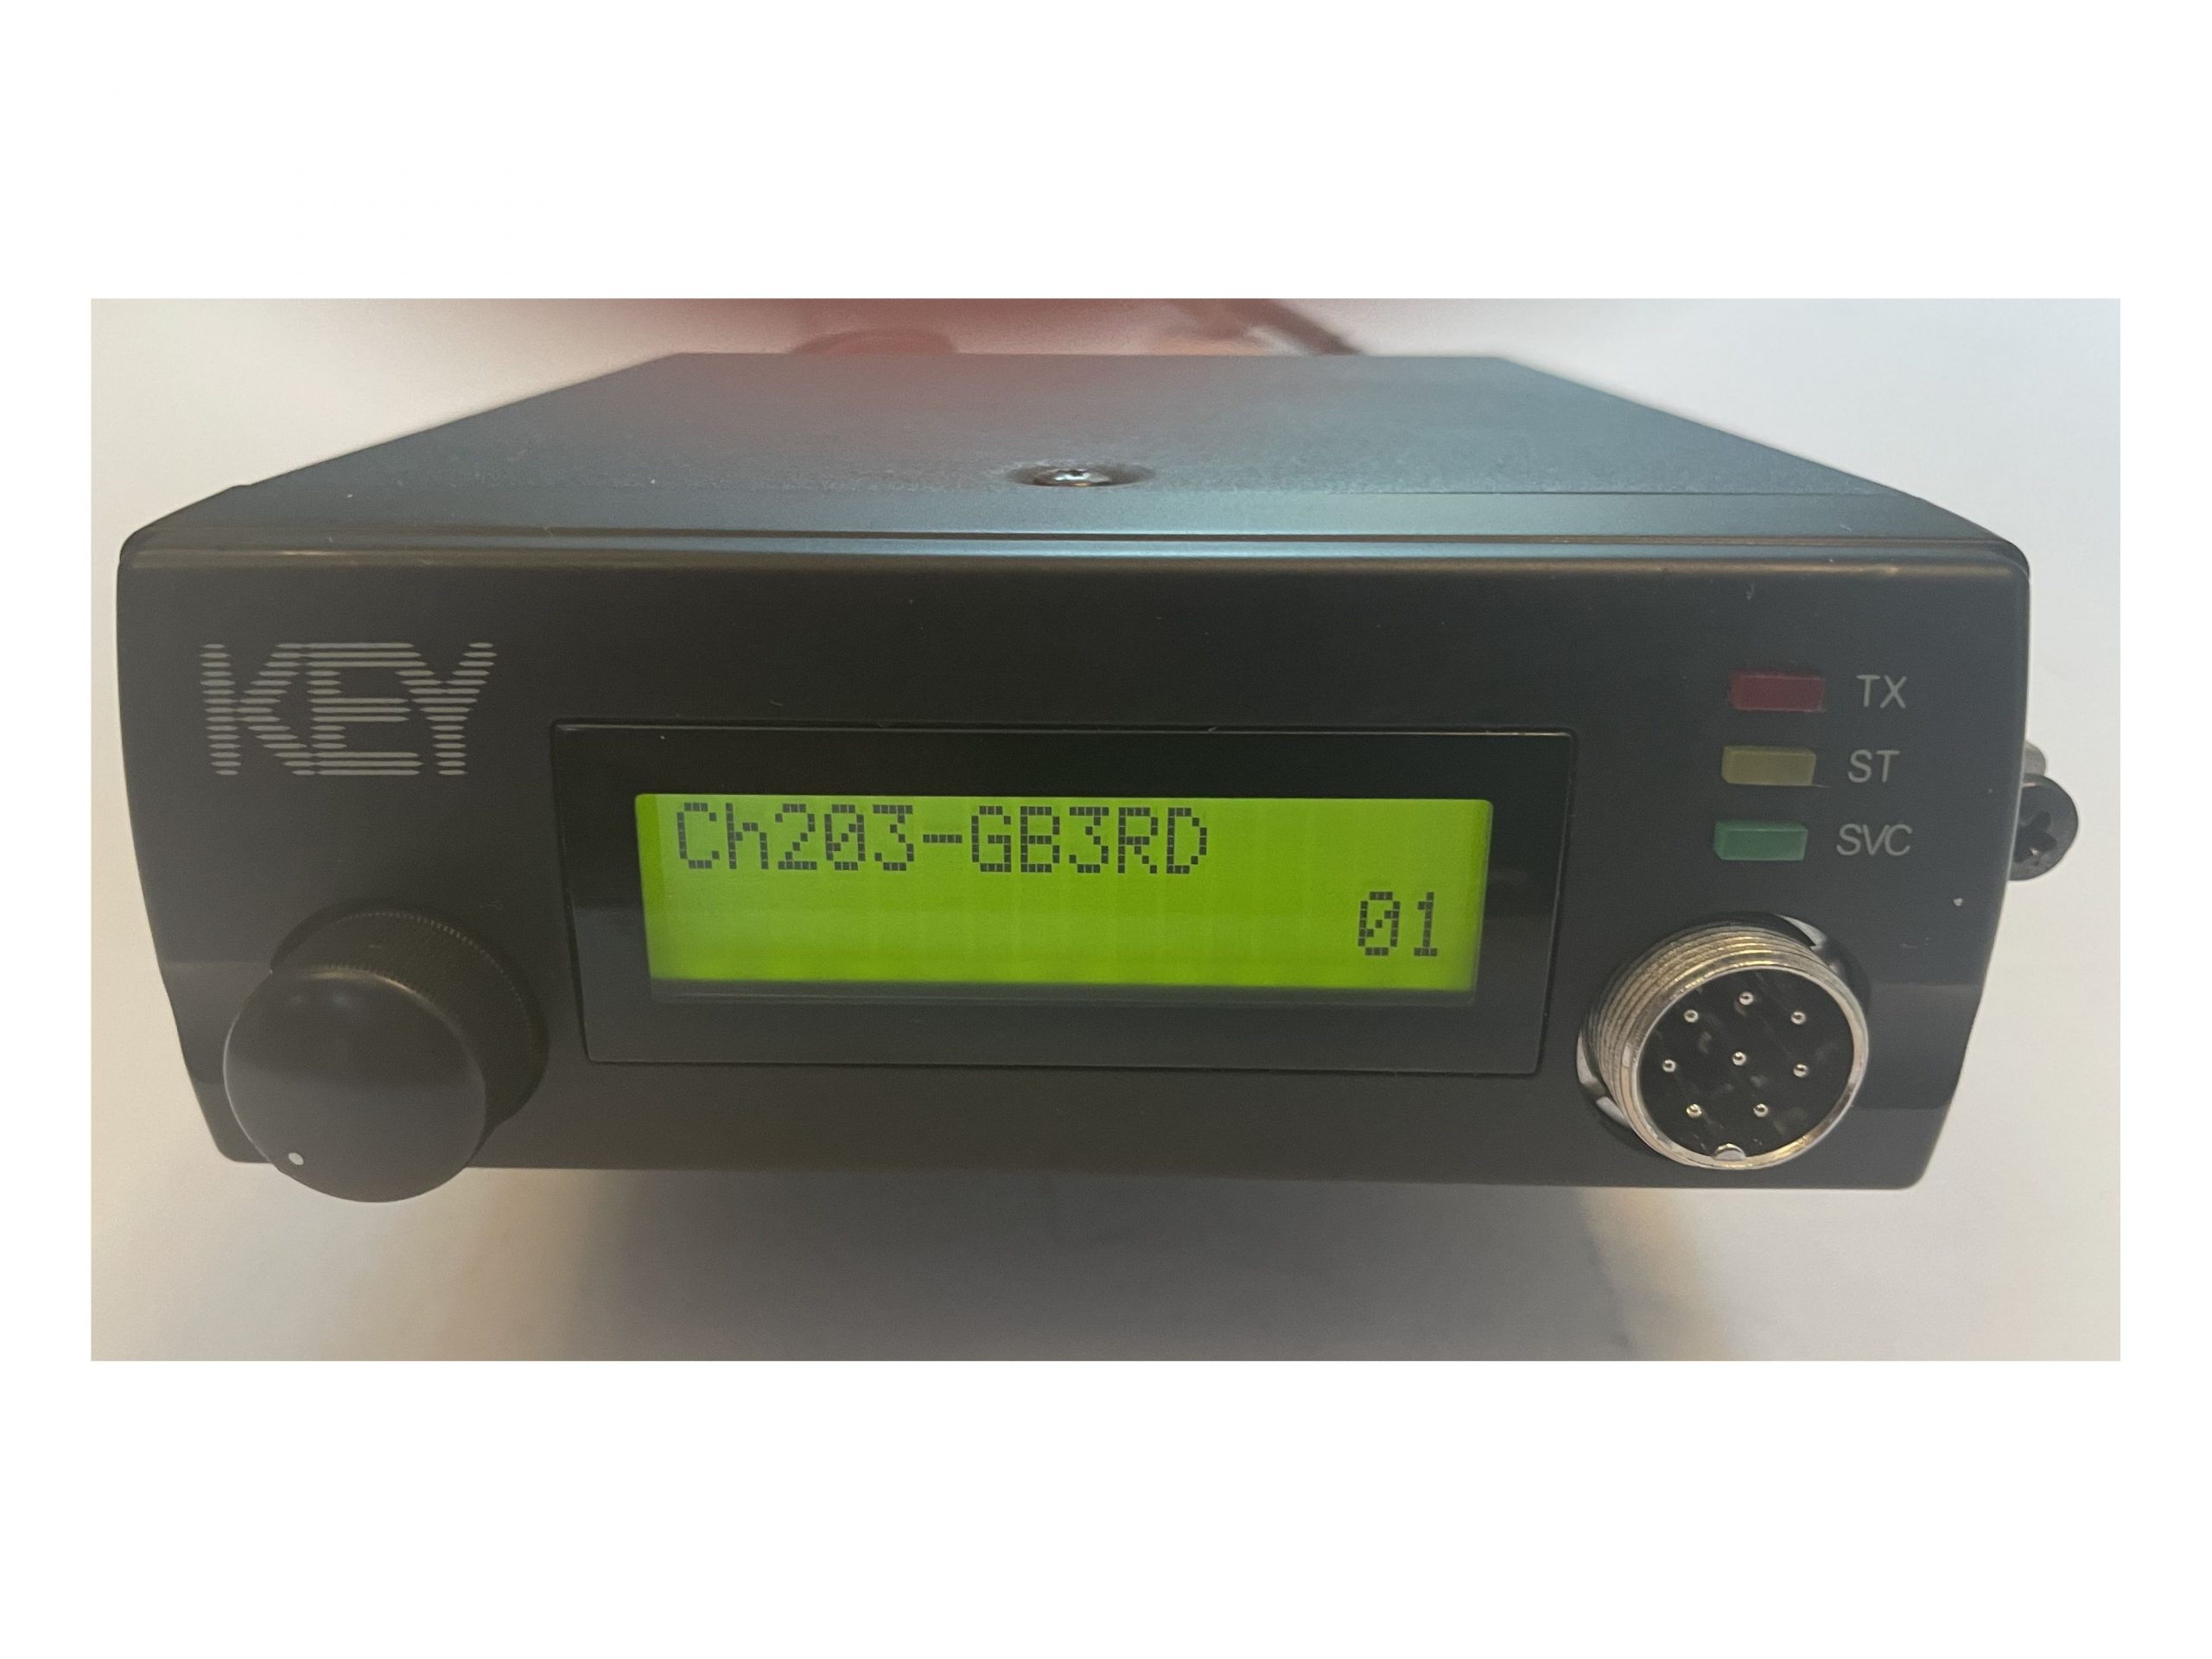 Key KM3000 2m VHF radios for Sale NOW ALL SOLD AND WE’RE SELLING THE KM4000 for still only £20!